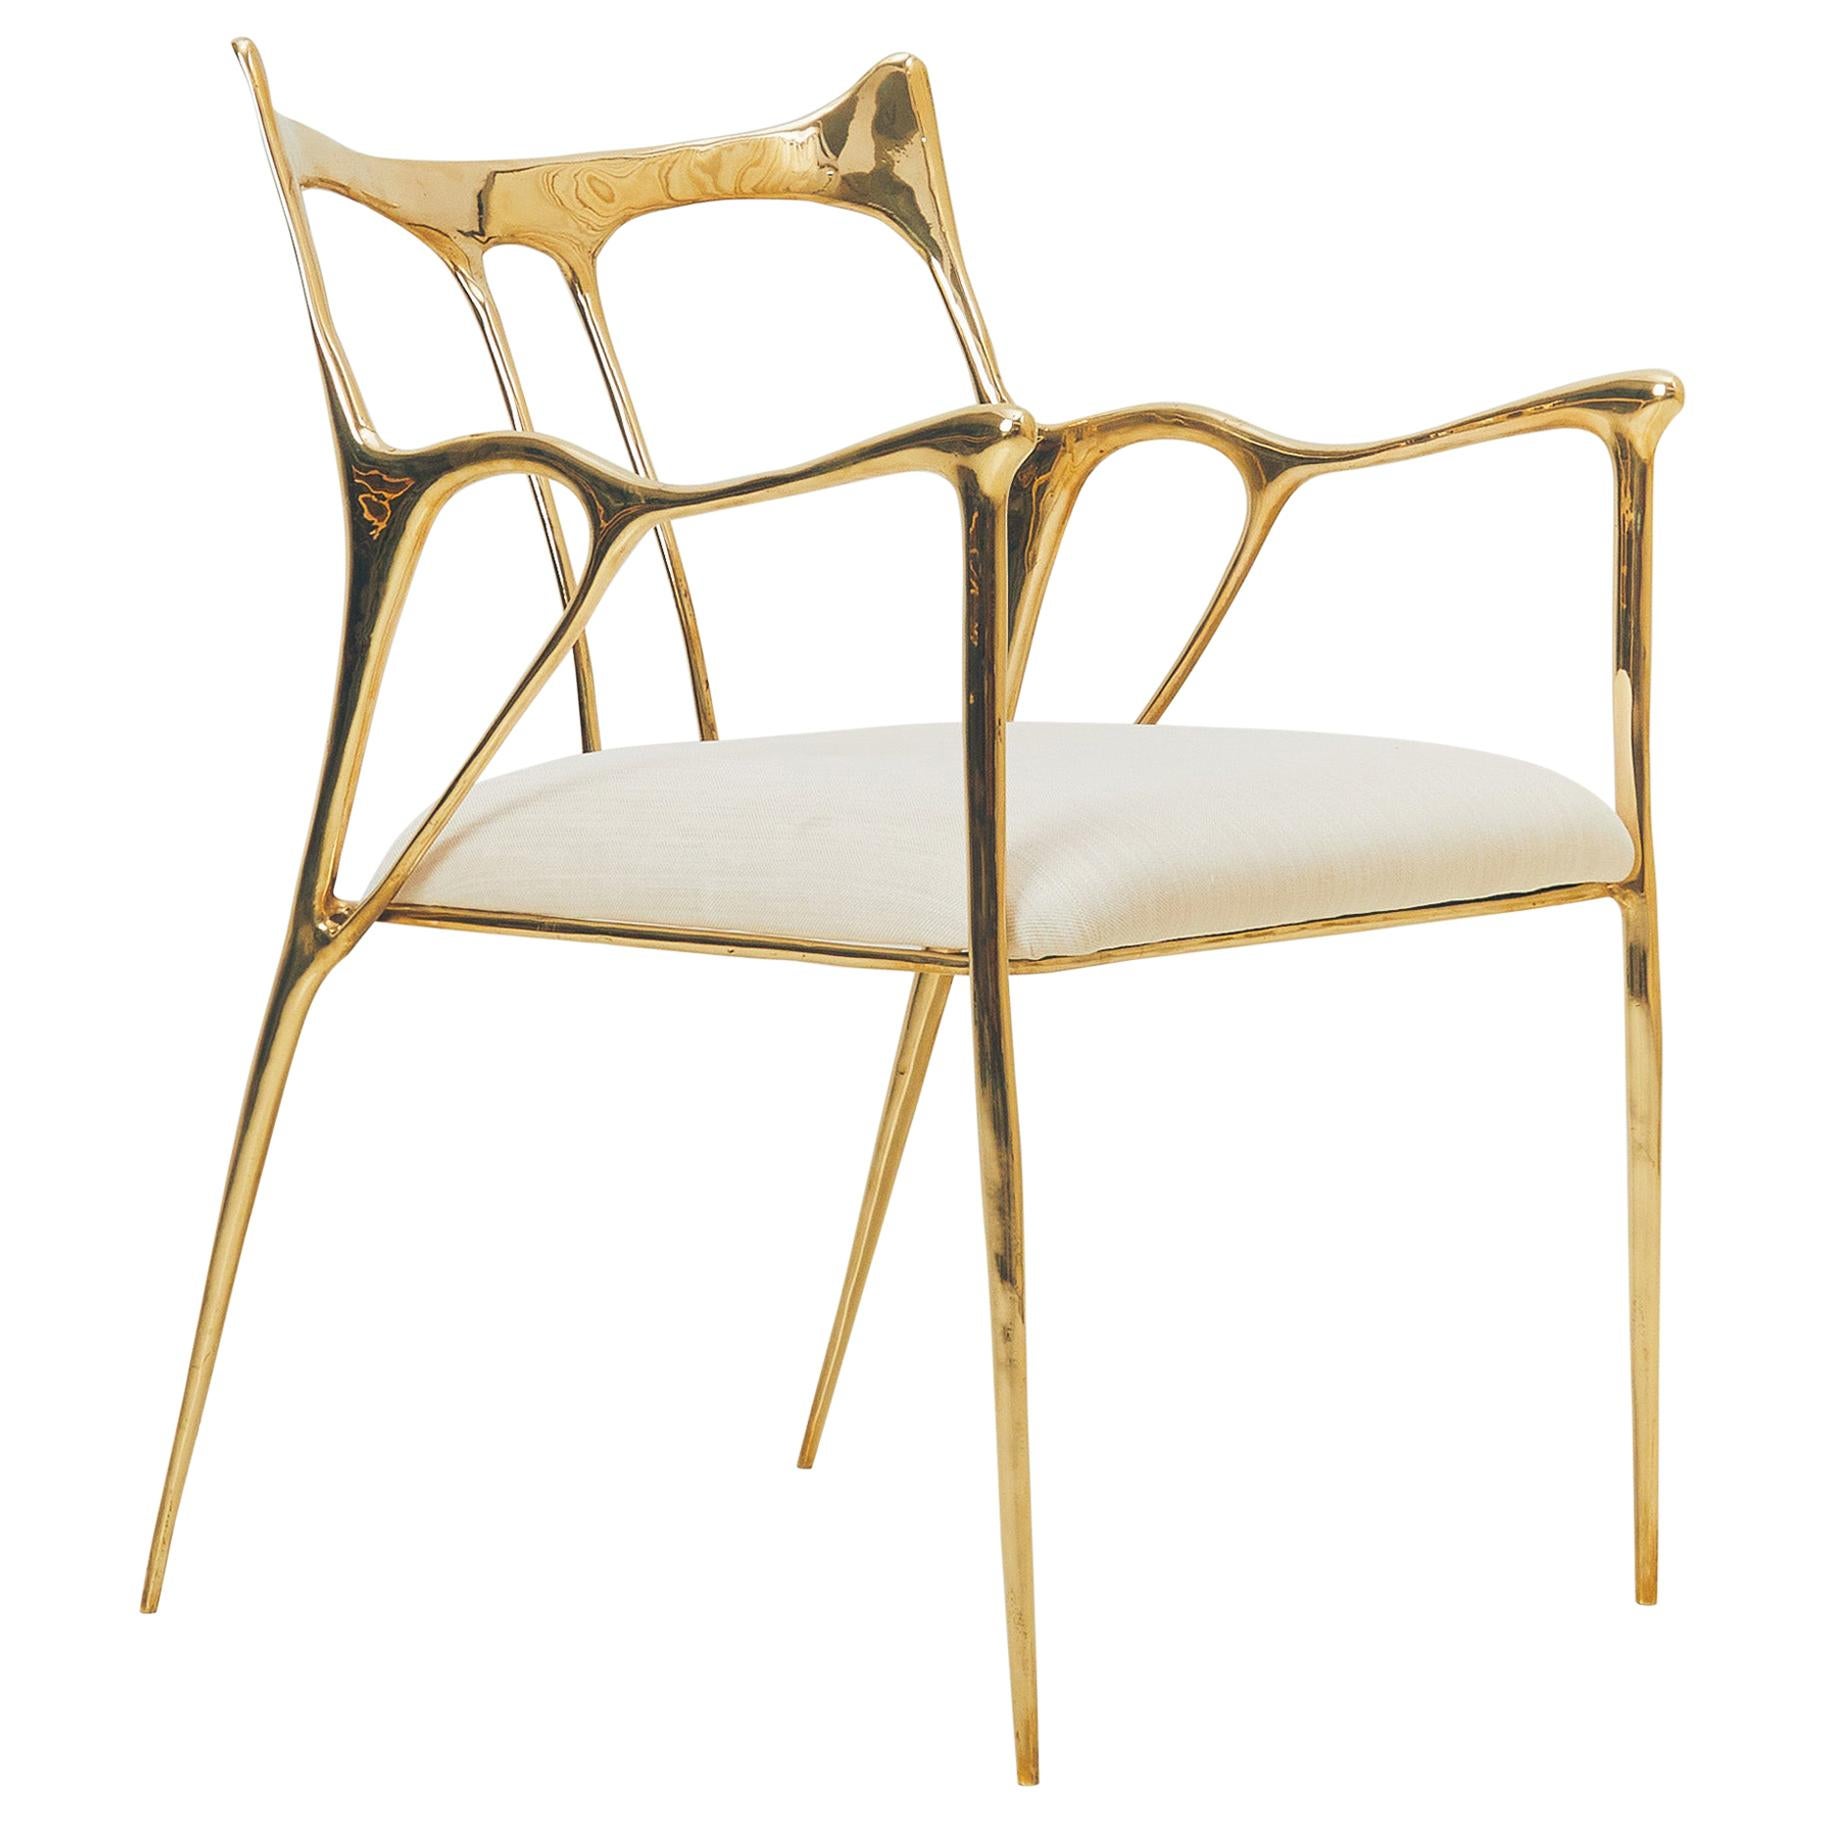 Calligraphic Sculpted Brass Chair by Misaya